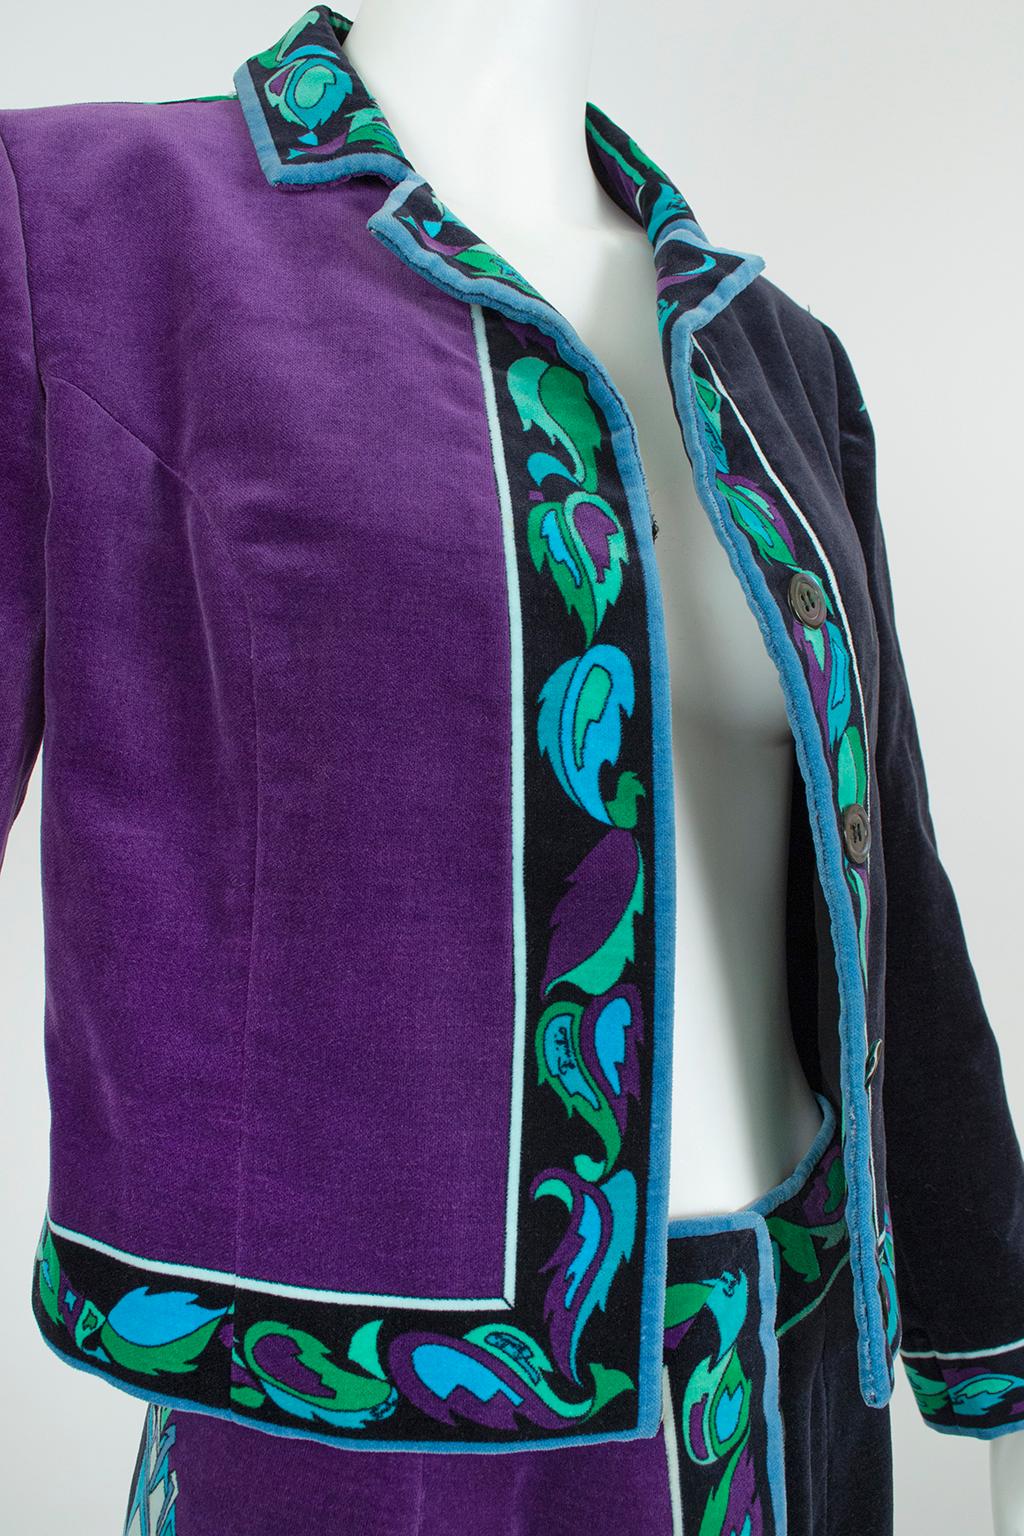 Emilio Pucci Black and Purple Rose Velvet Jacket and Maxi Skirt, Saks – S, 1971 For Sale 3